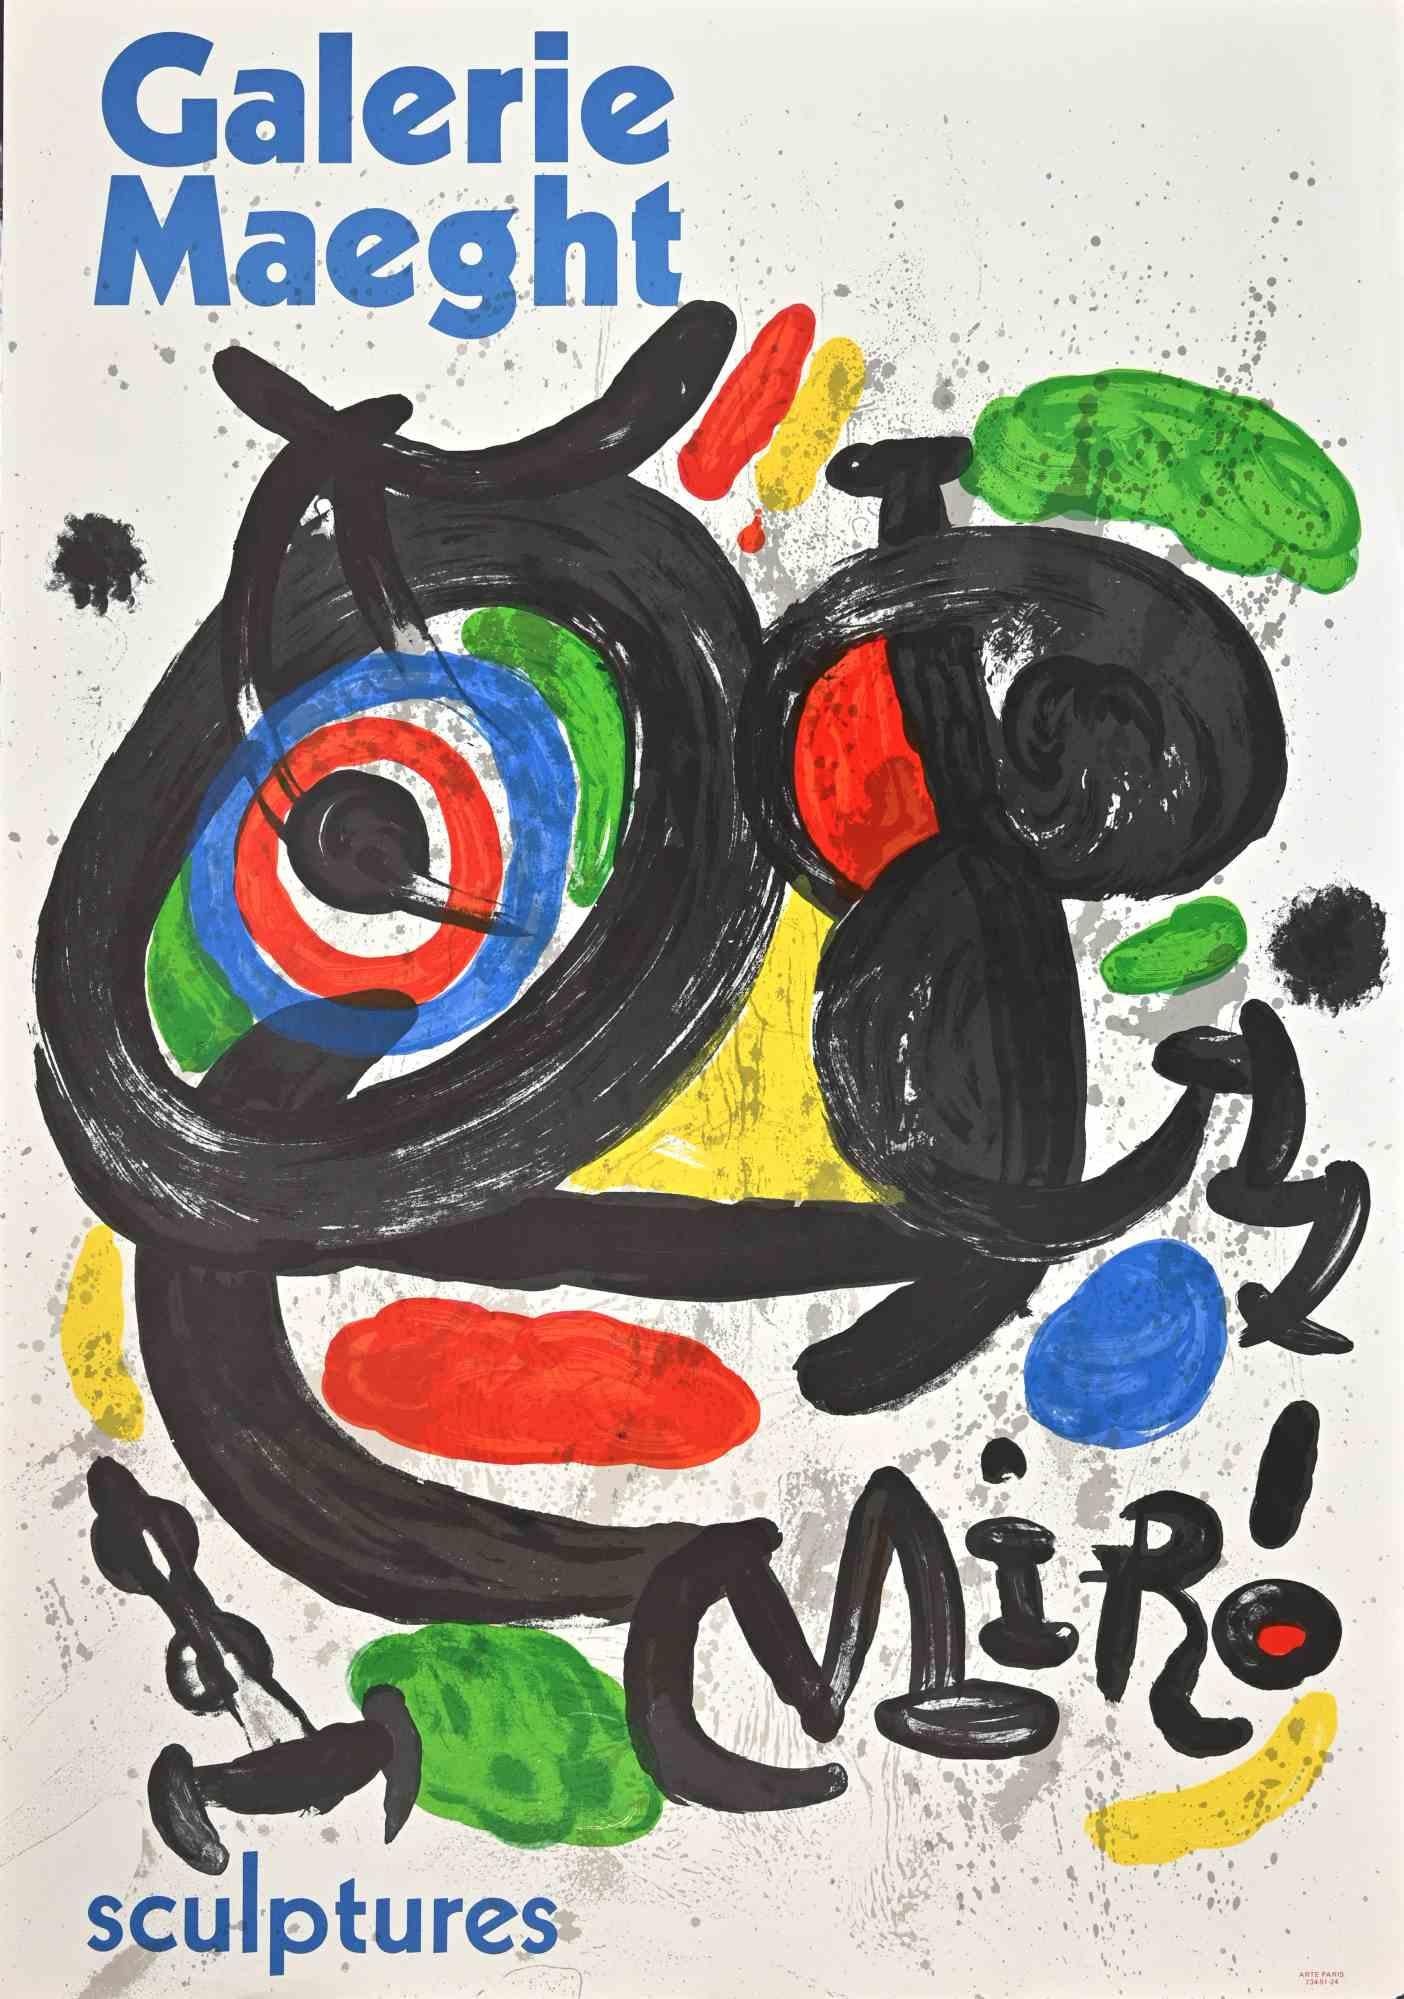 Vintage Poster Exhibition Galerie Maeght-Lithograph/Offset after J. Mirò-1978